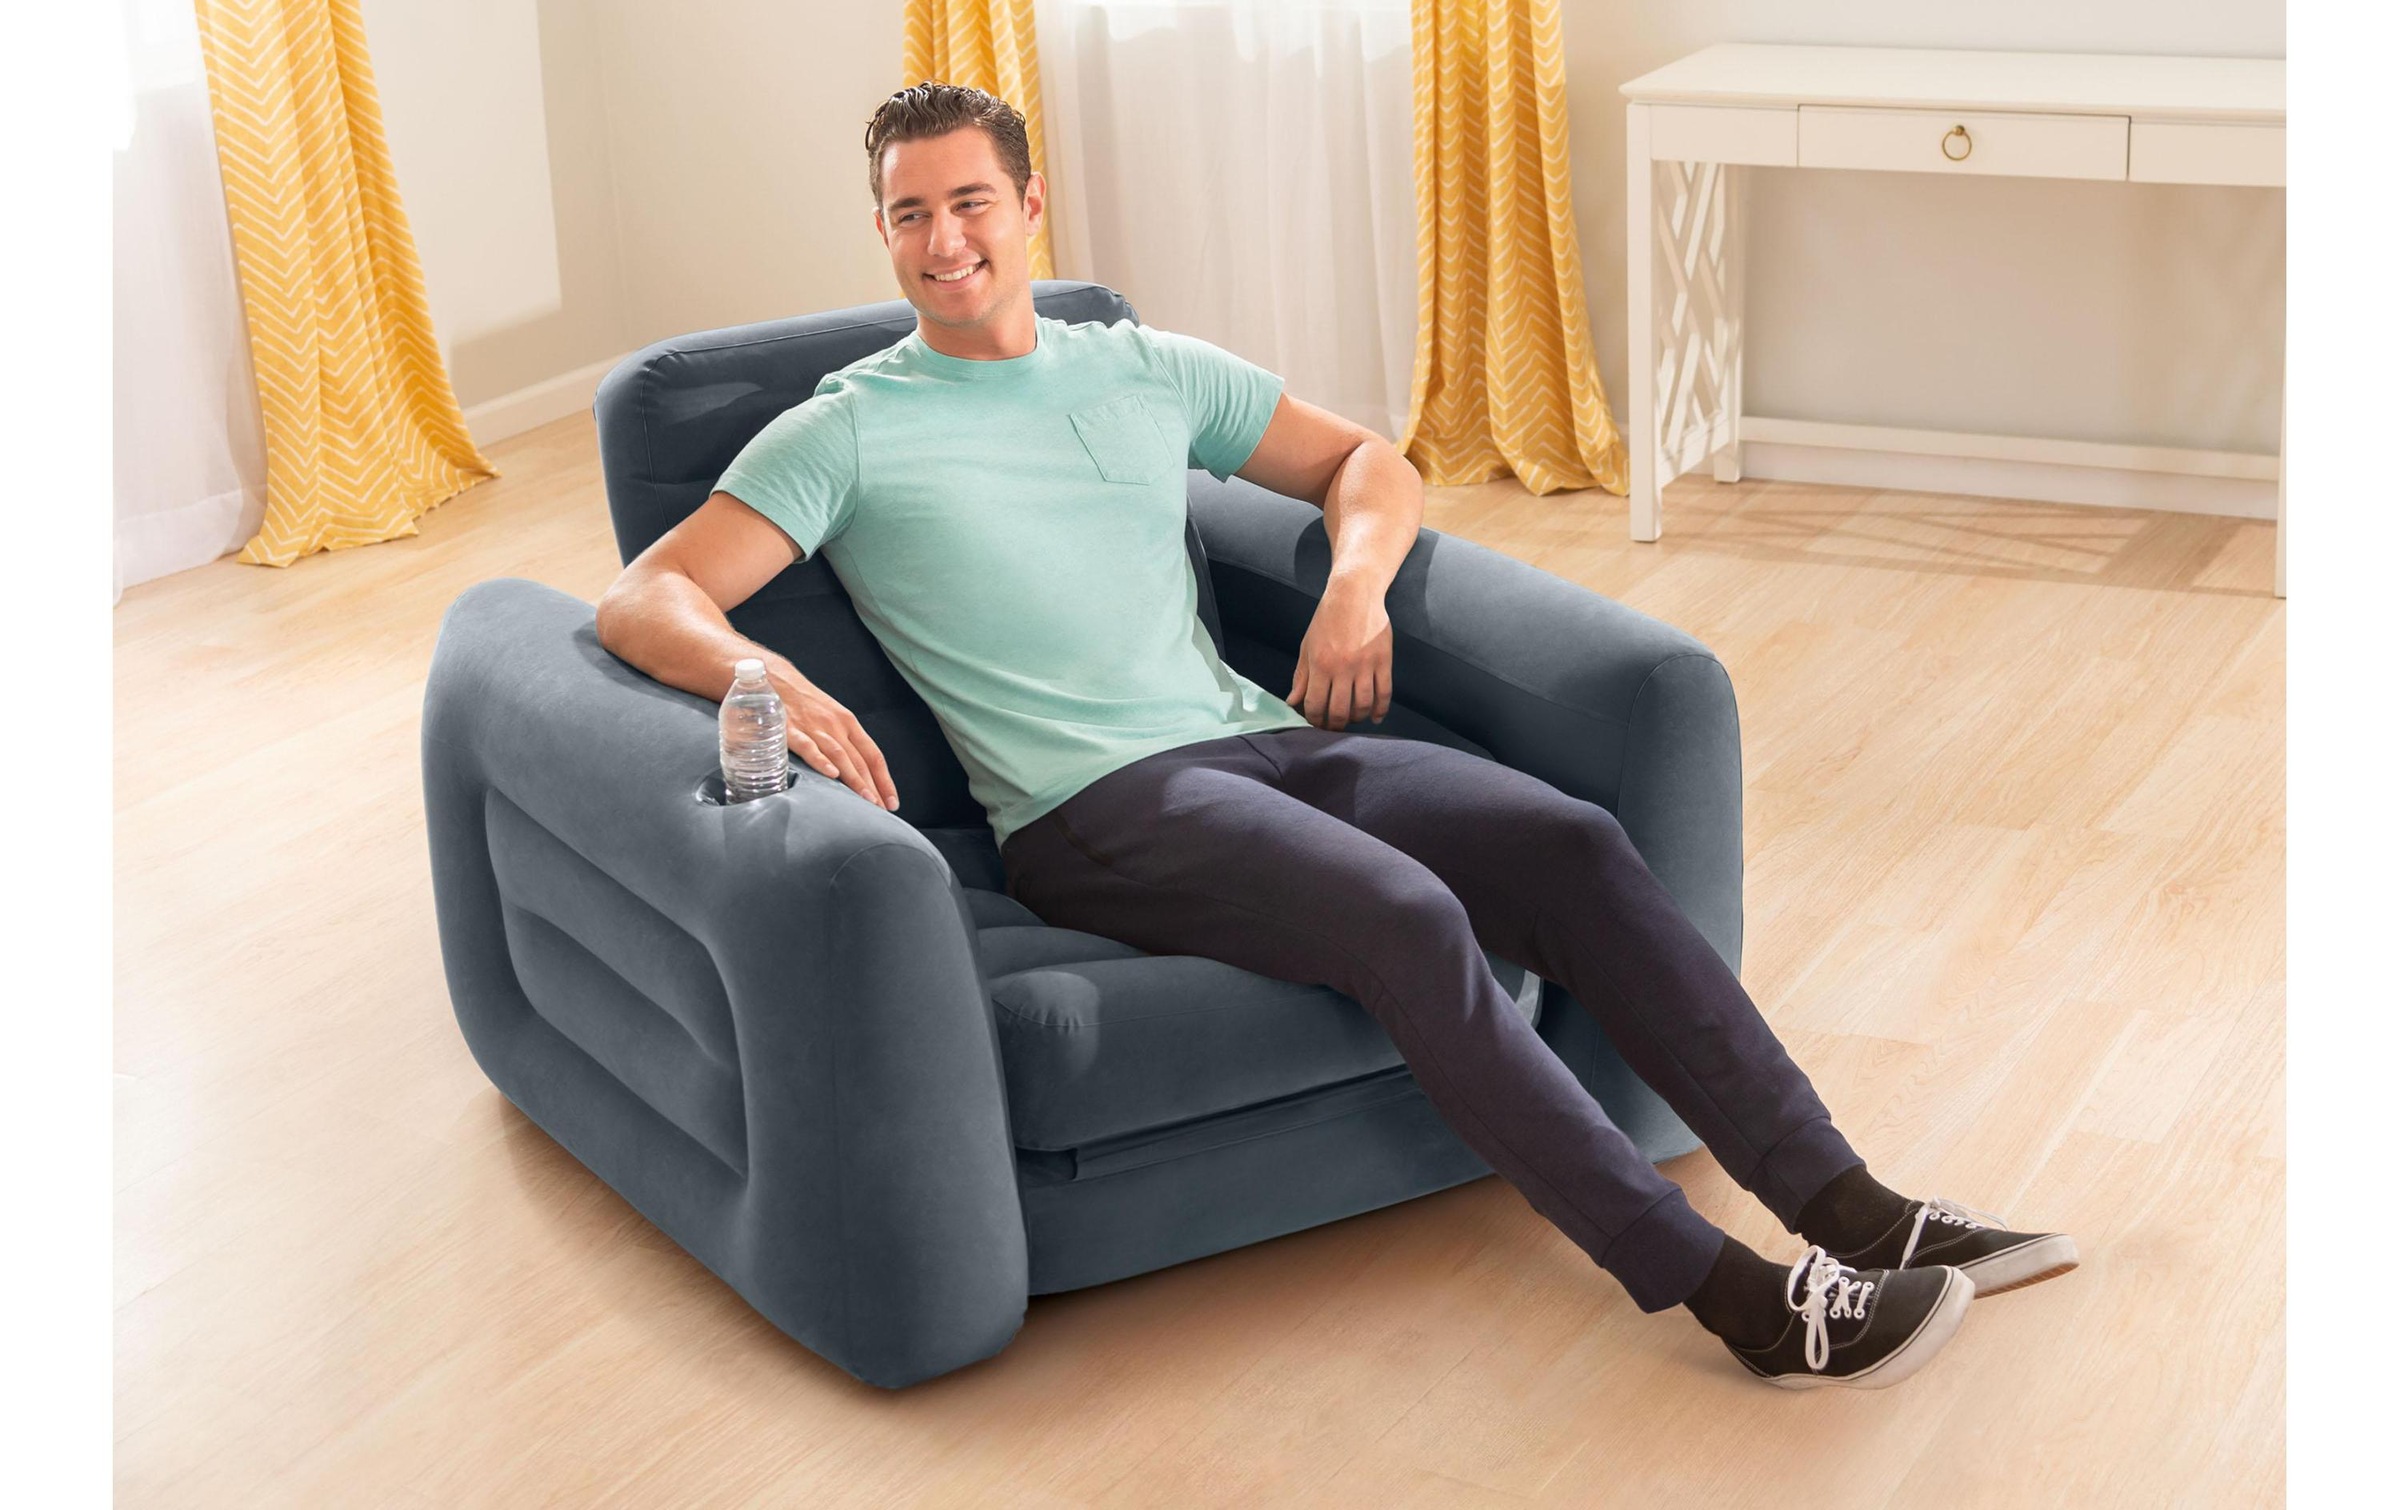 Intex Luftsofa »Pull-Out Chair«